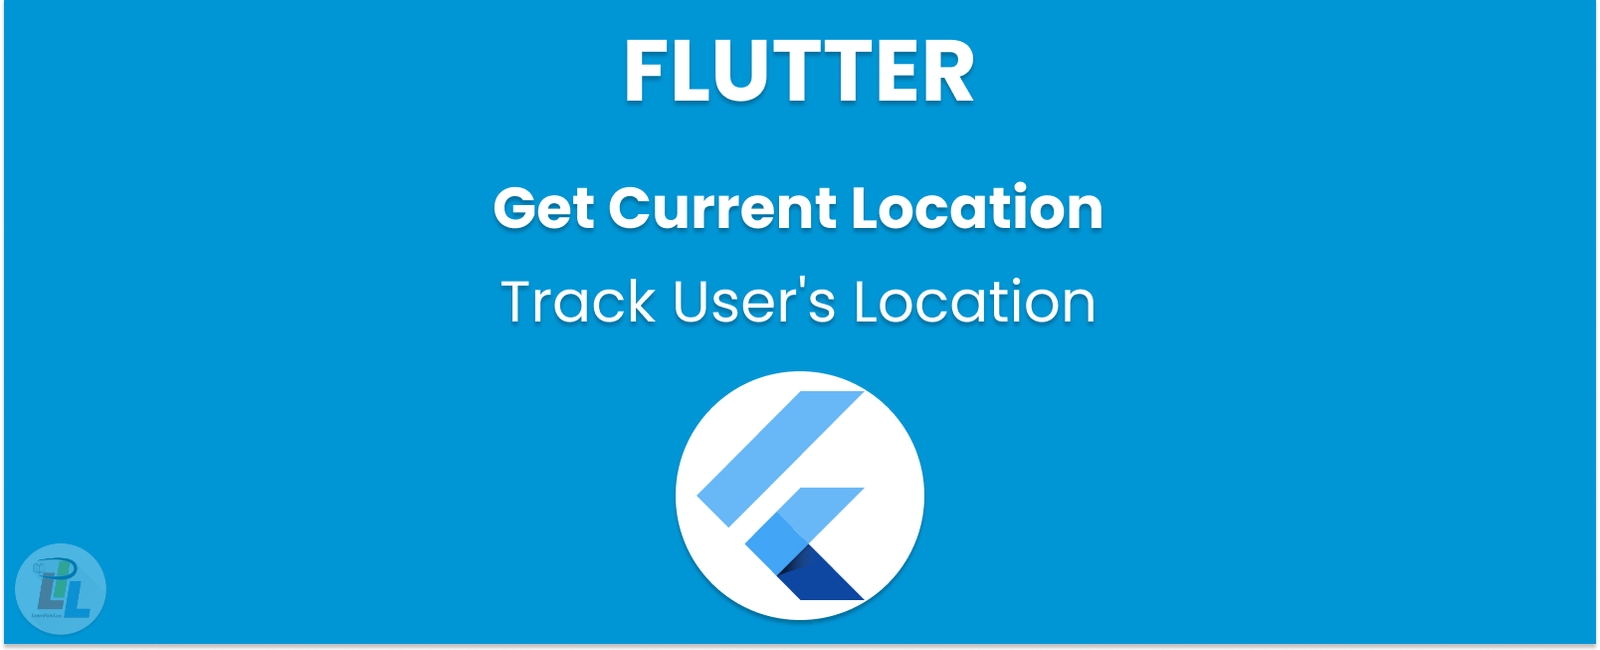 Get Current Location in Flutter | Easily Track User's Location